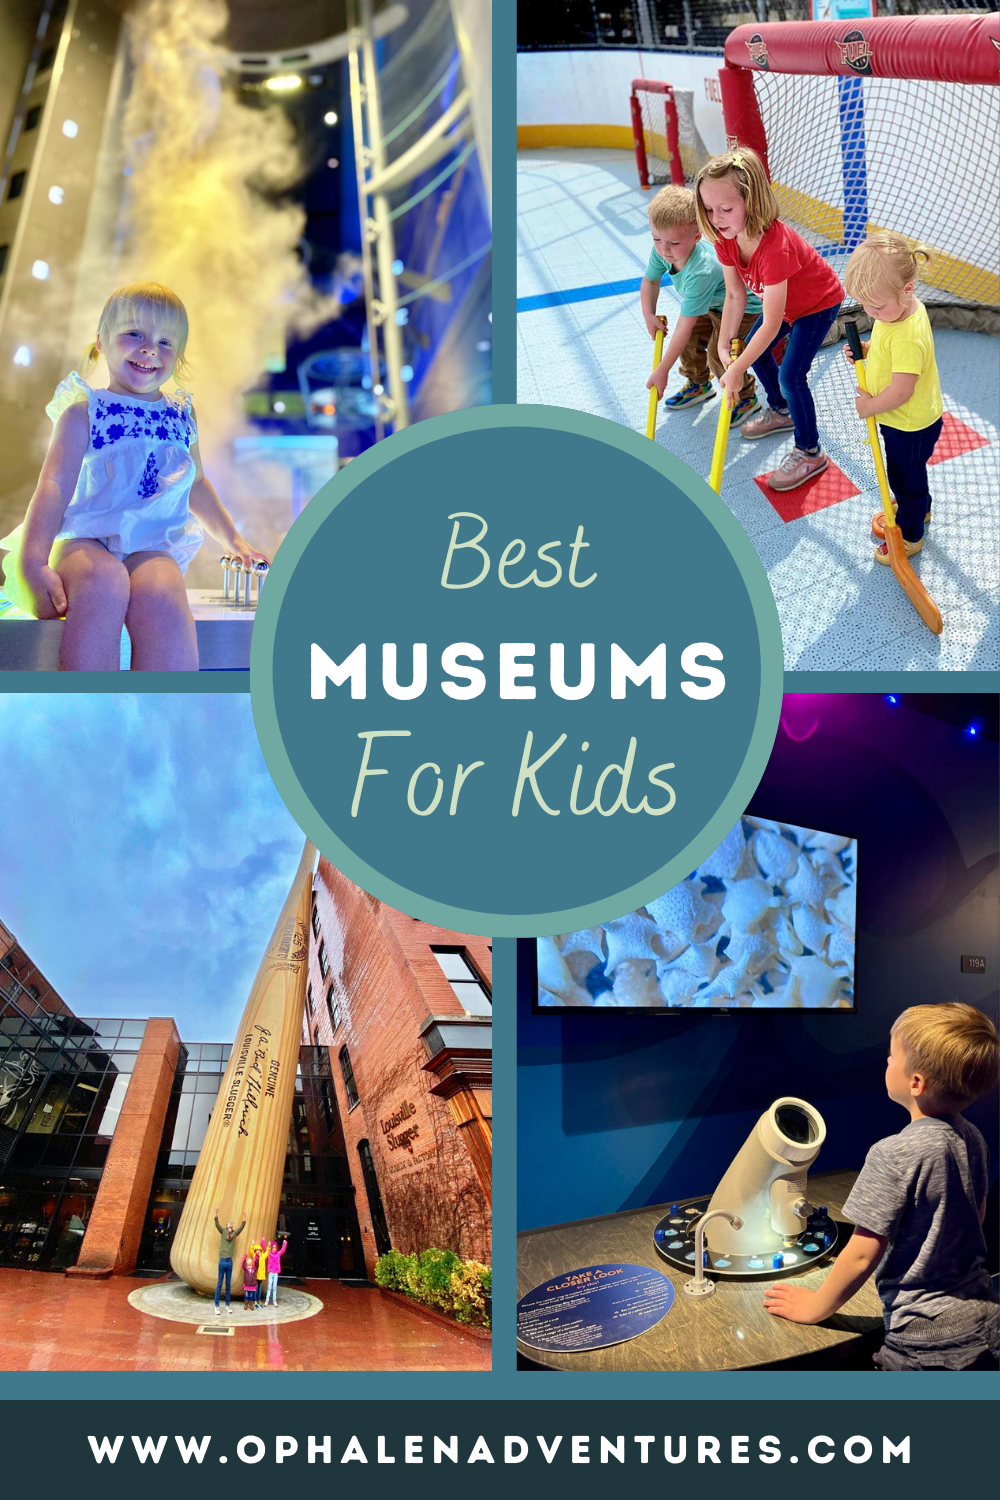 Best Museums for Kids, images of children in various museums | O'Phalen Adventures